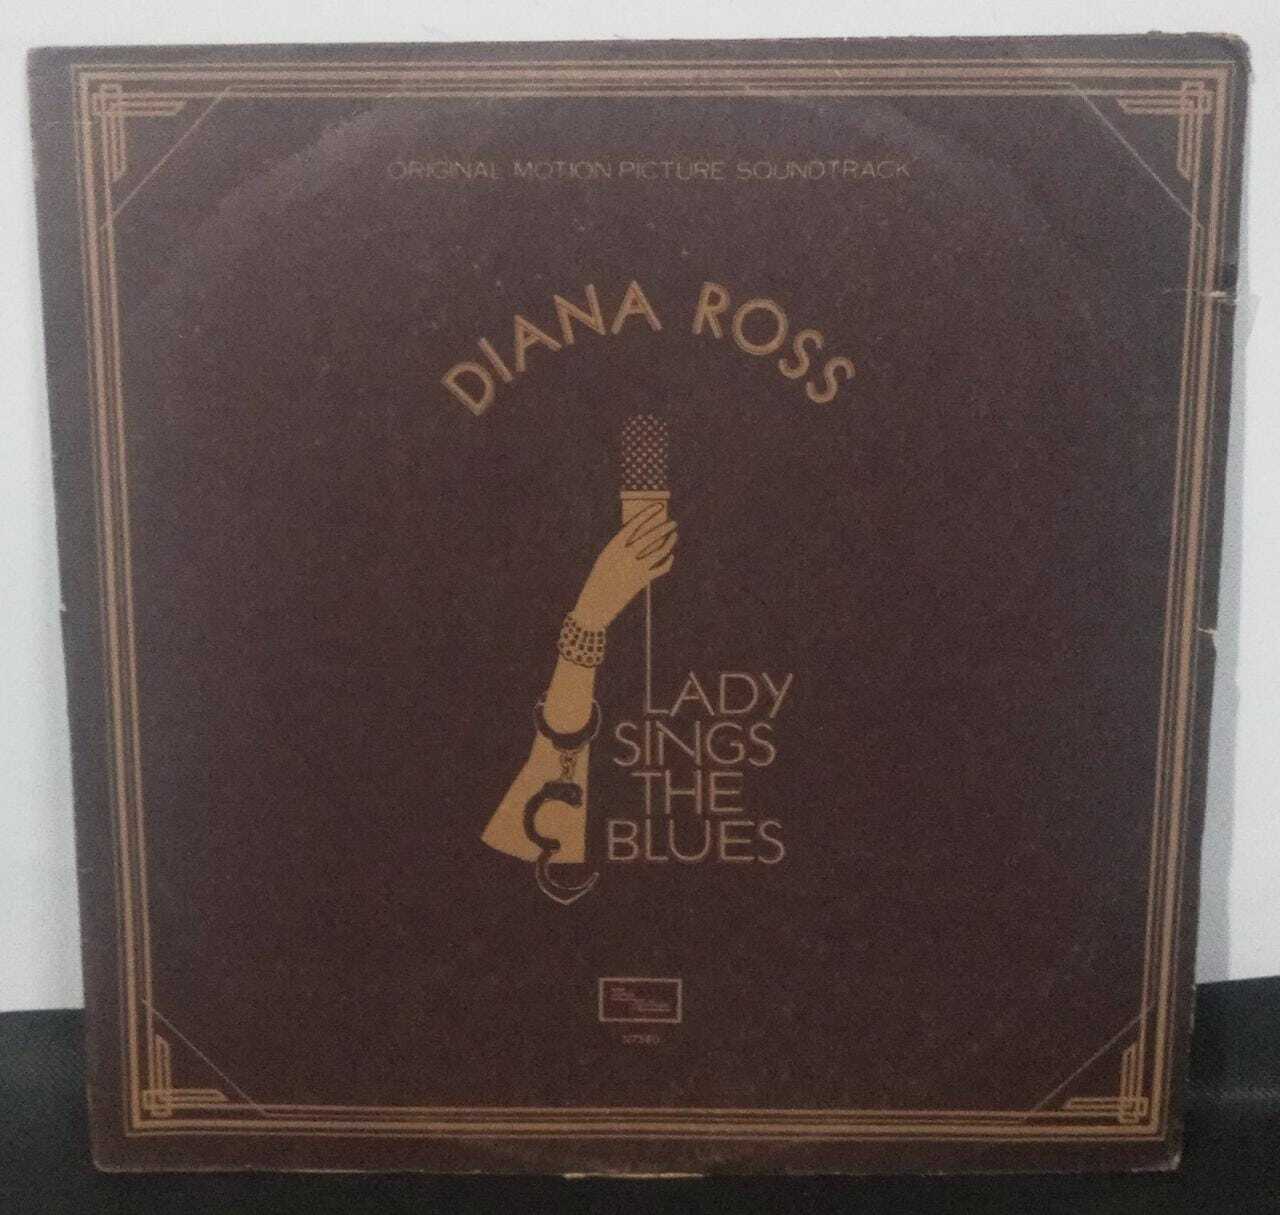 Vinil -  Diana Ross -  Lady Sings The Blues - Original Motion Picture Soundtrack (usa)